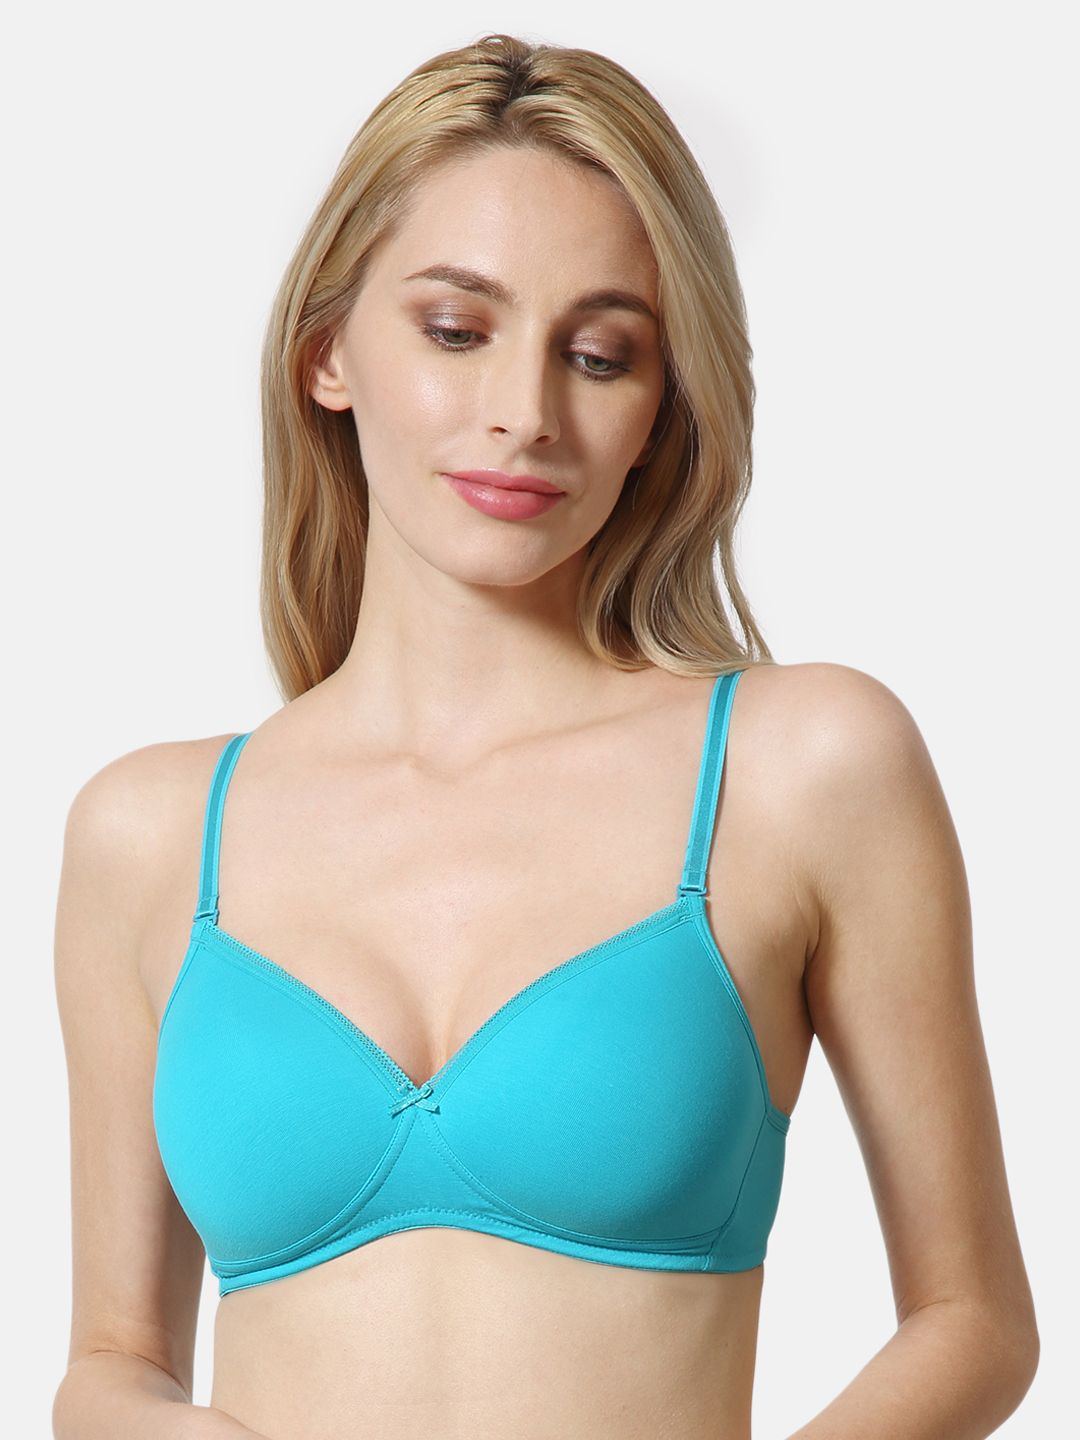 Van Heusen Blue Solid Non-Wired Lightly Padded Antibacterial Bra ILIBR1CSSWW2911002 Price in India